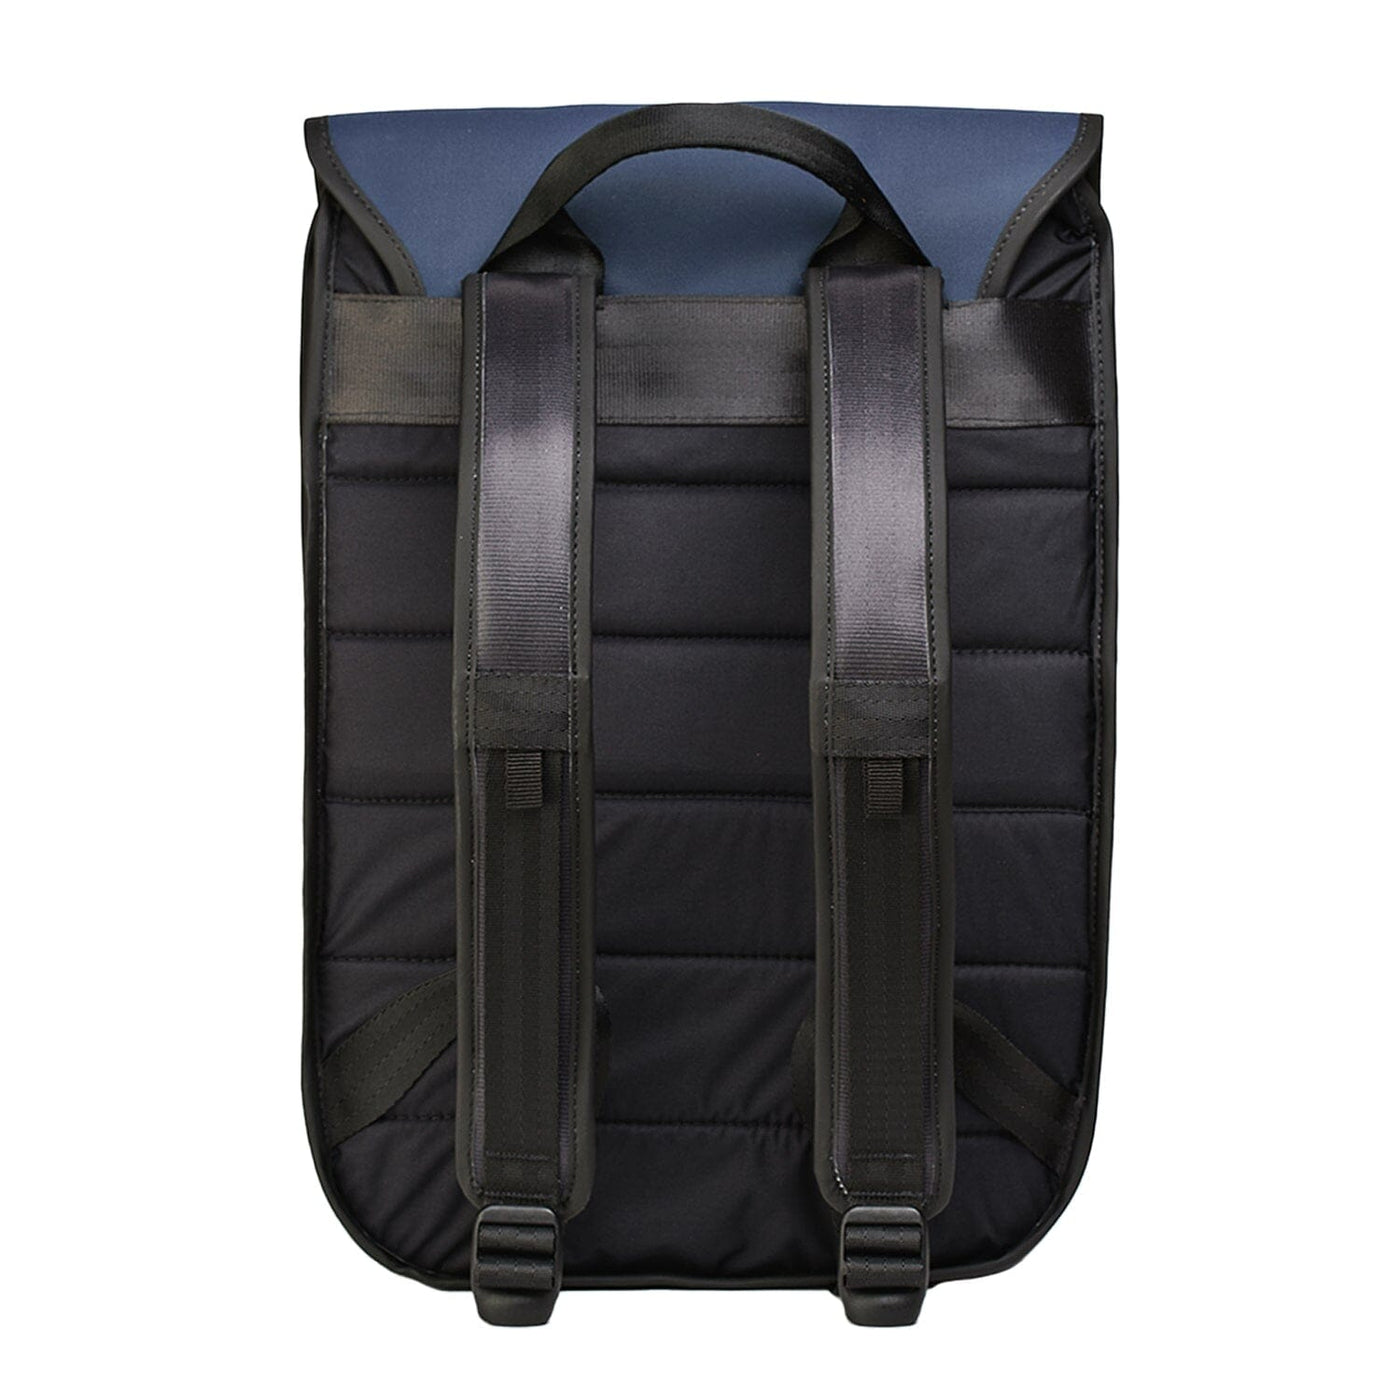 water resistant backpack padded back panel